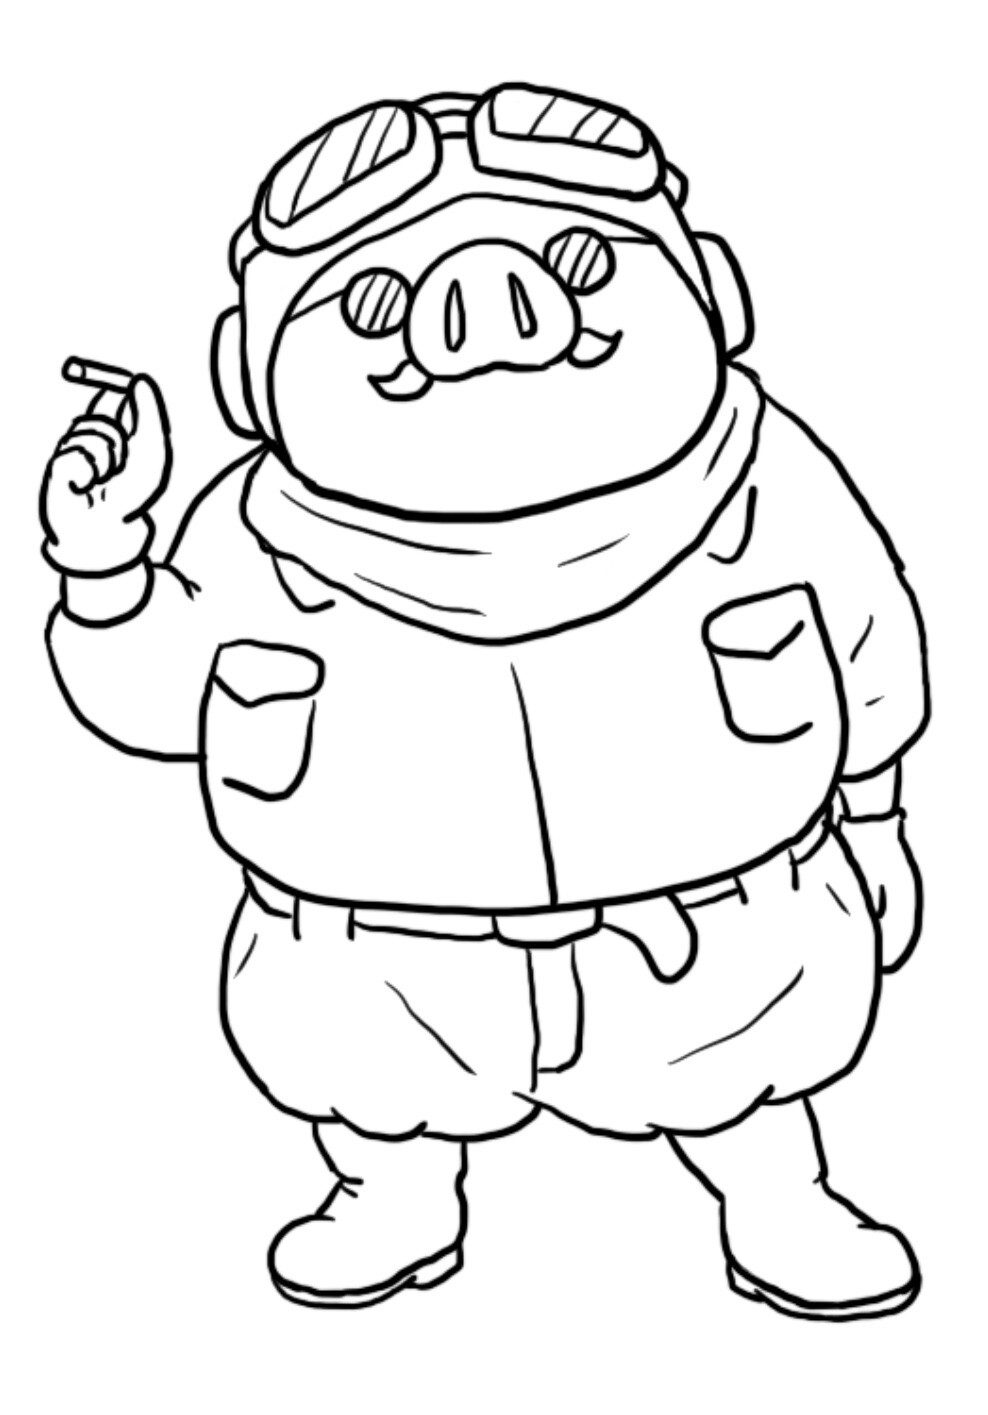 Porco Rosso Art Coloring Pages